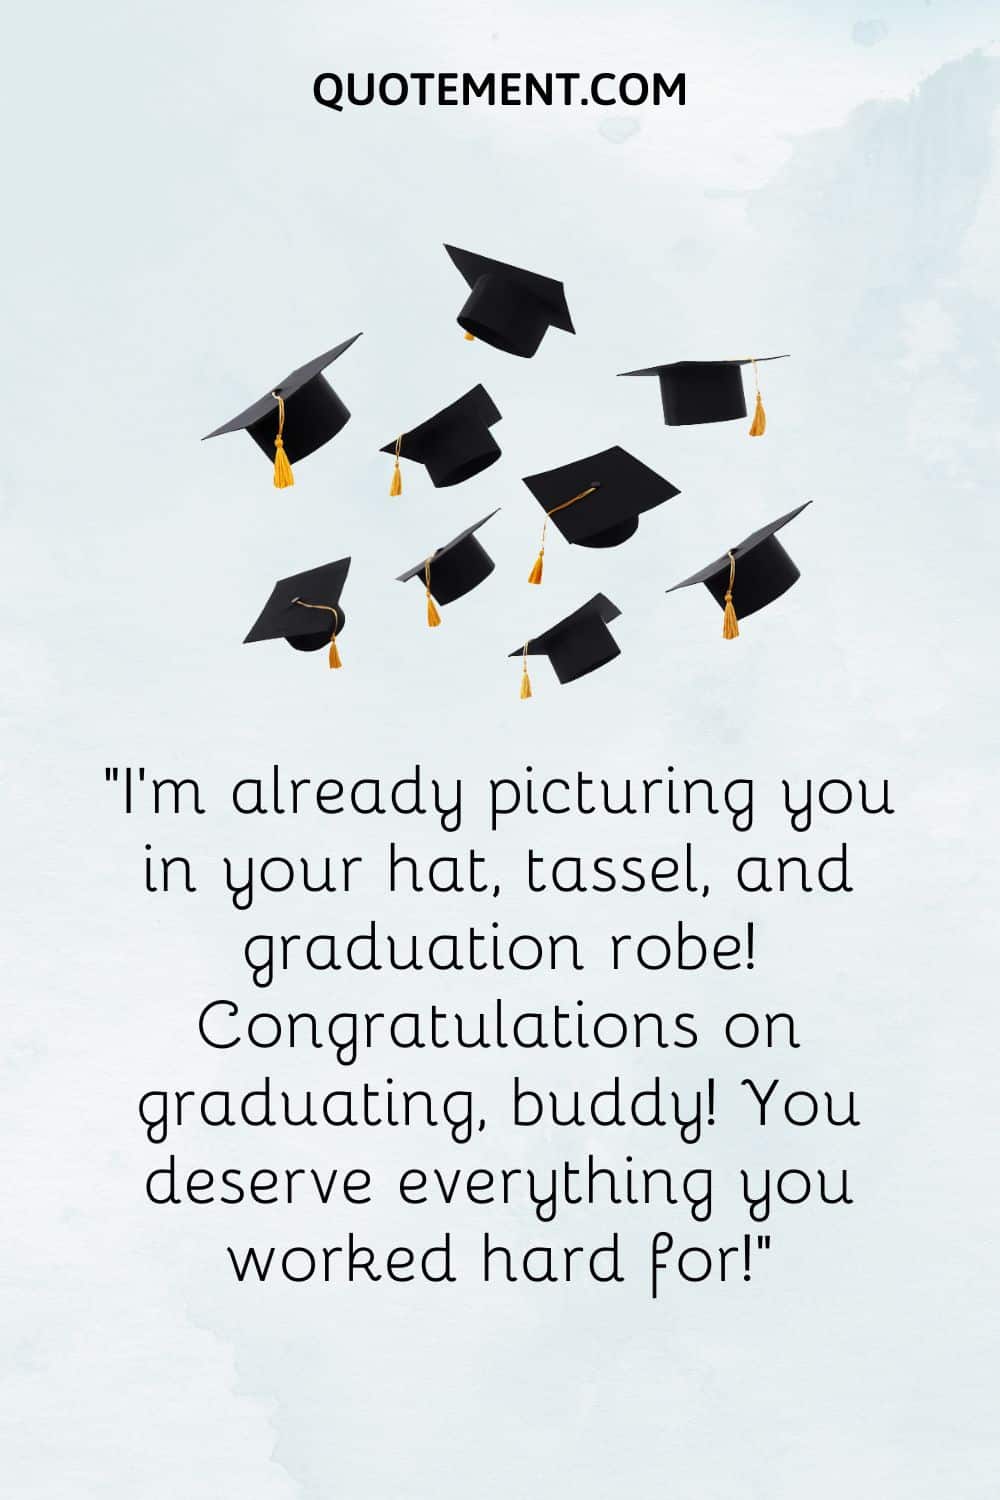 I’m already picturing you in your hat, tassel, and graduation robe! Congratulations on graduating, buddy! You deserve everything you worked hard for!